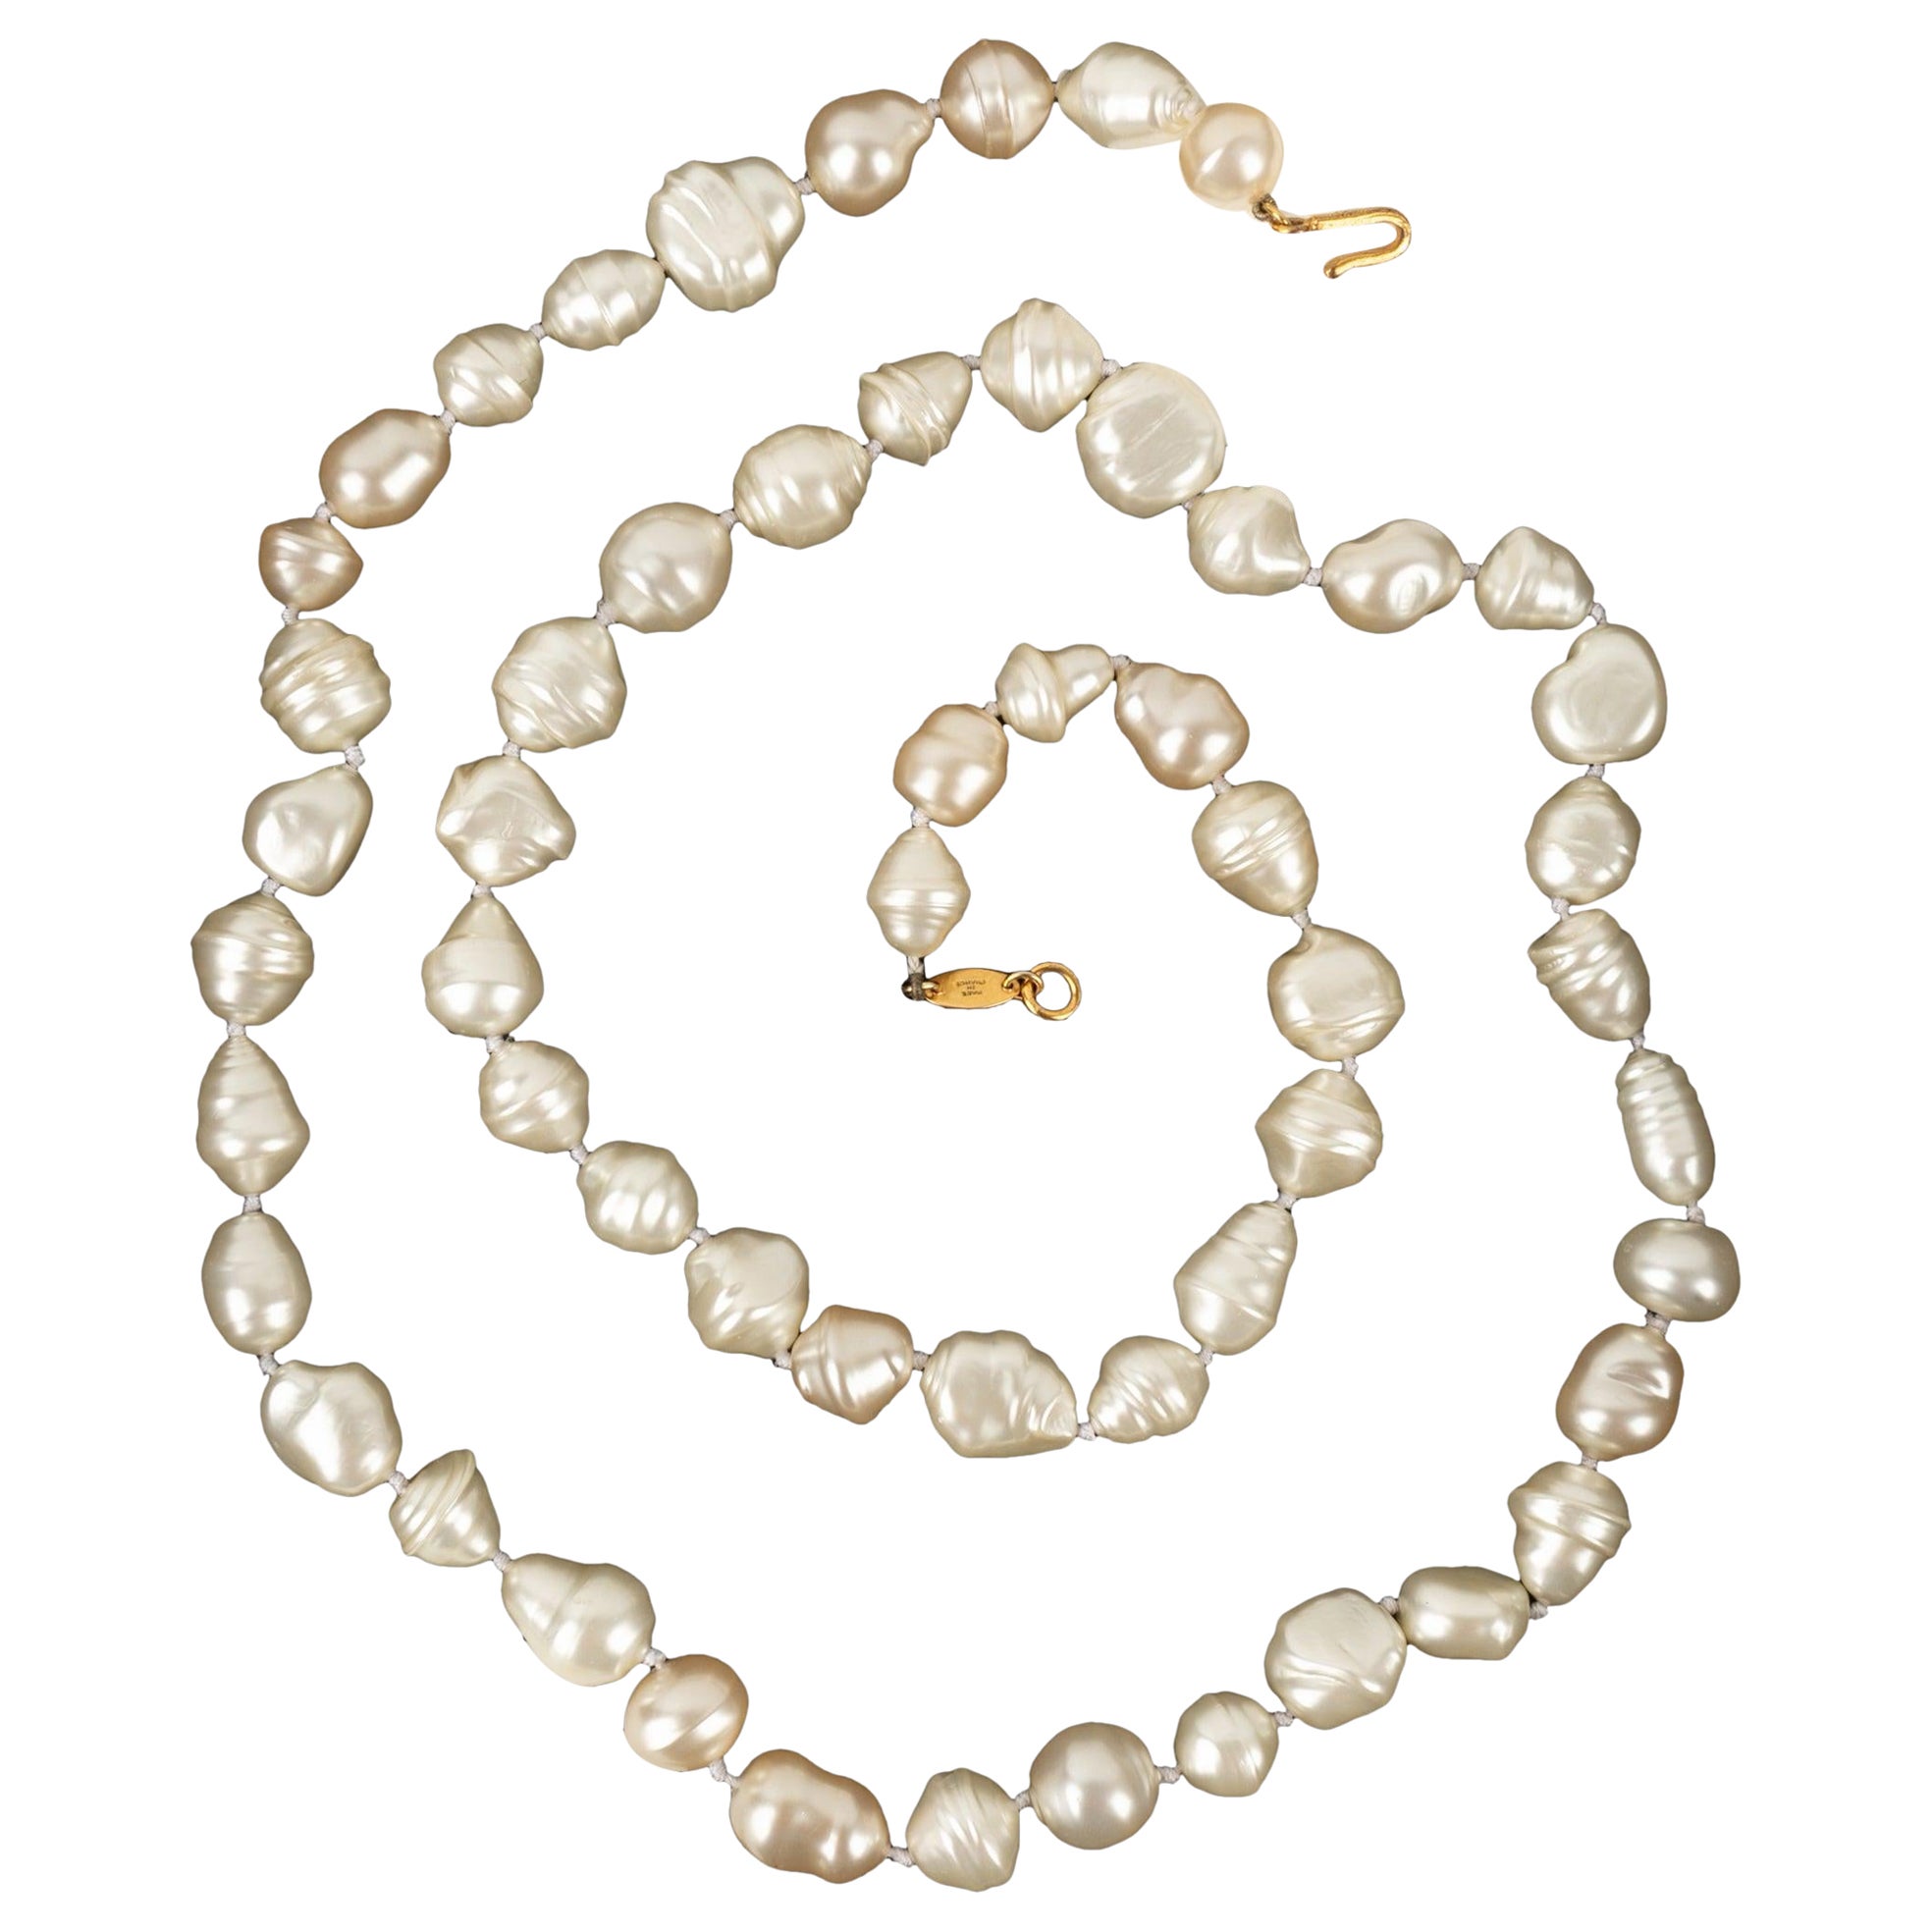 Chanel Costume Pearl Necklace / Sautoir, 1984